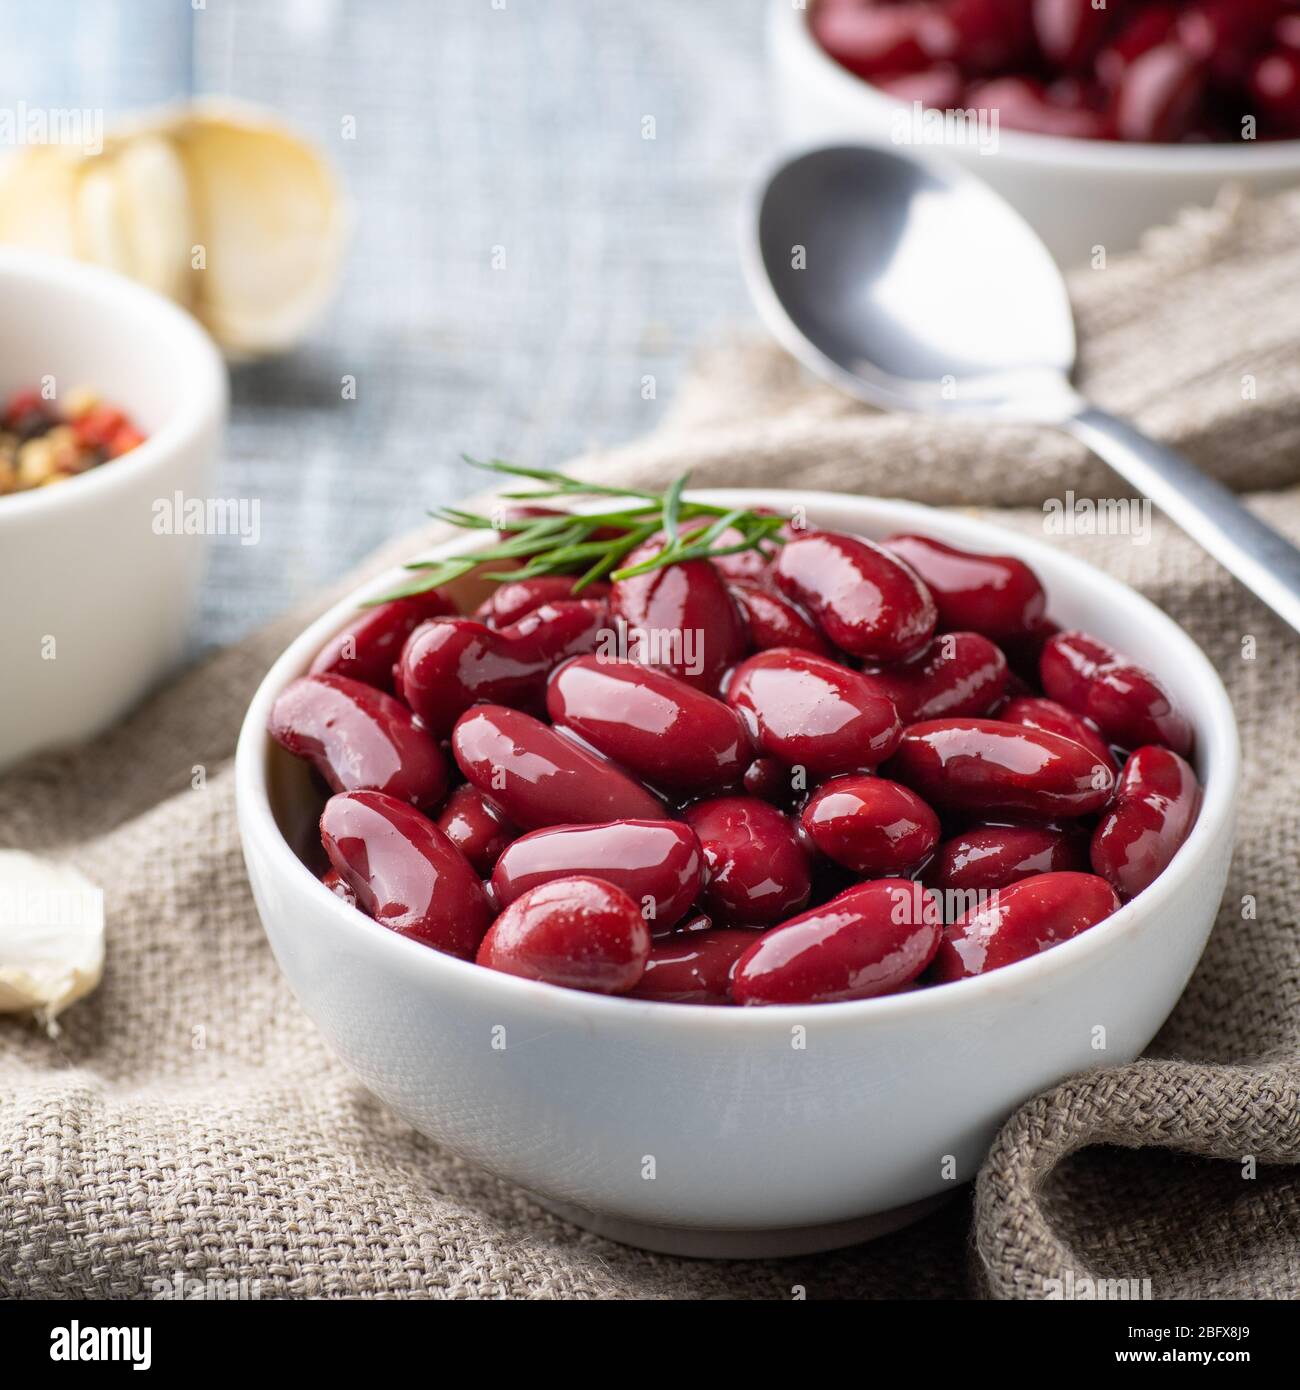 Canned red kidney beans in white bowl on a table Stock Photo